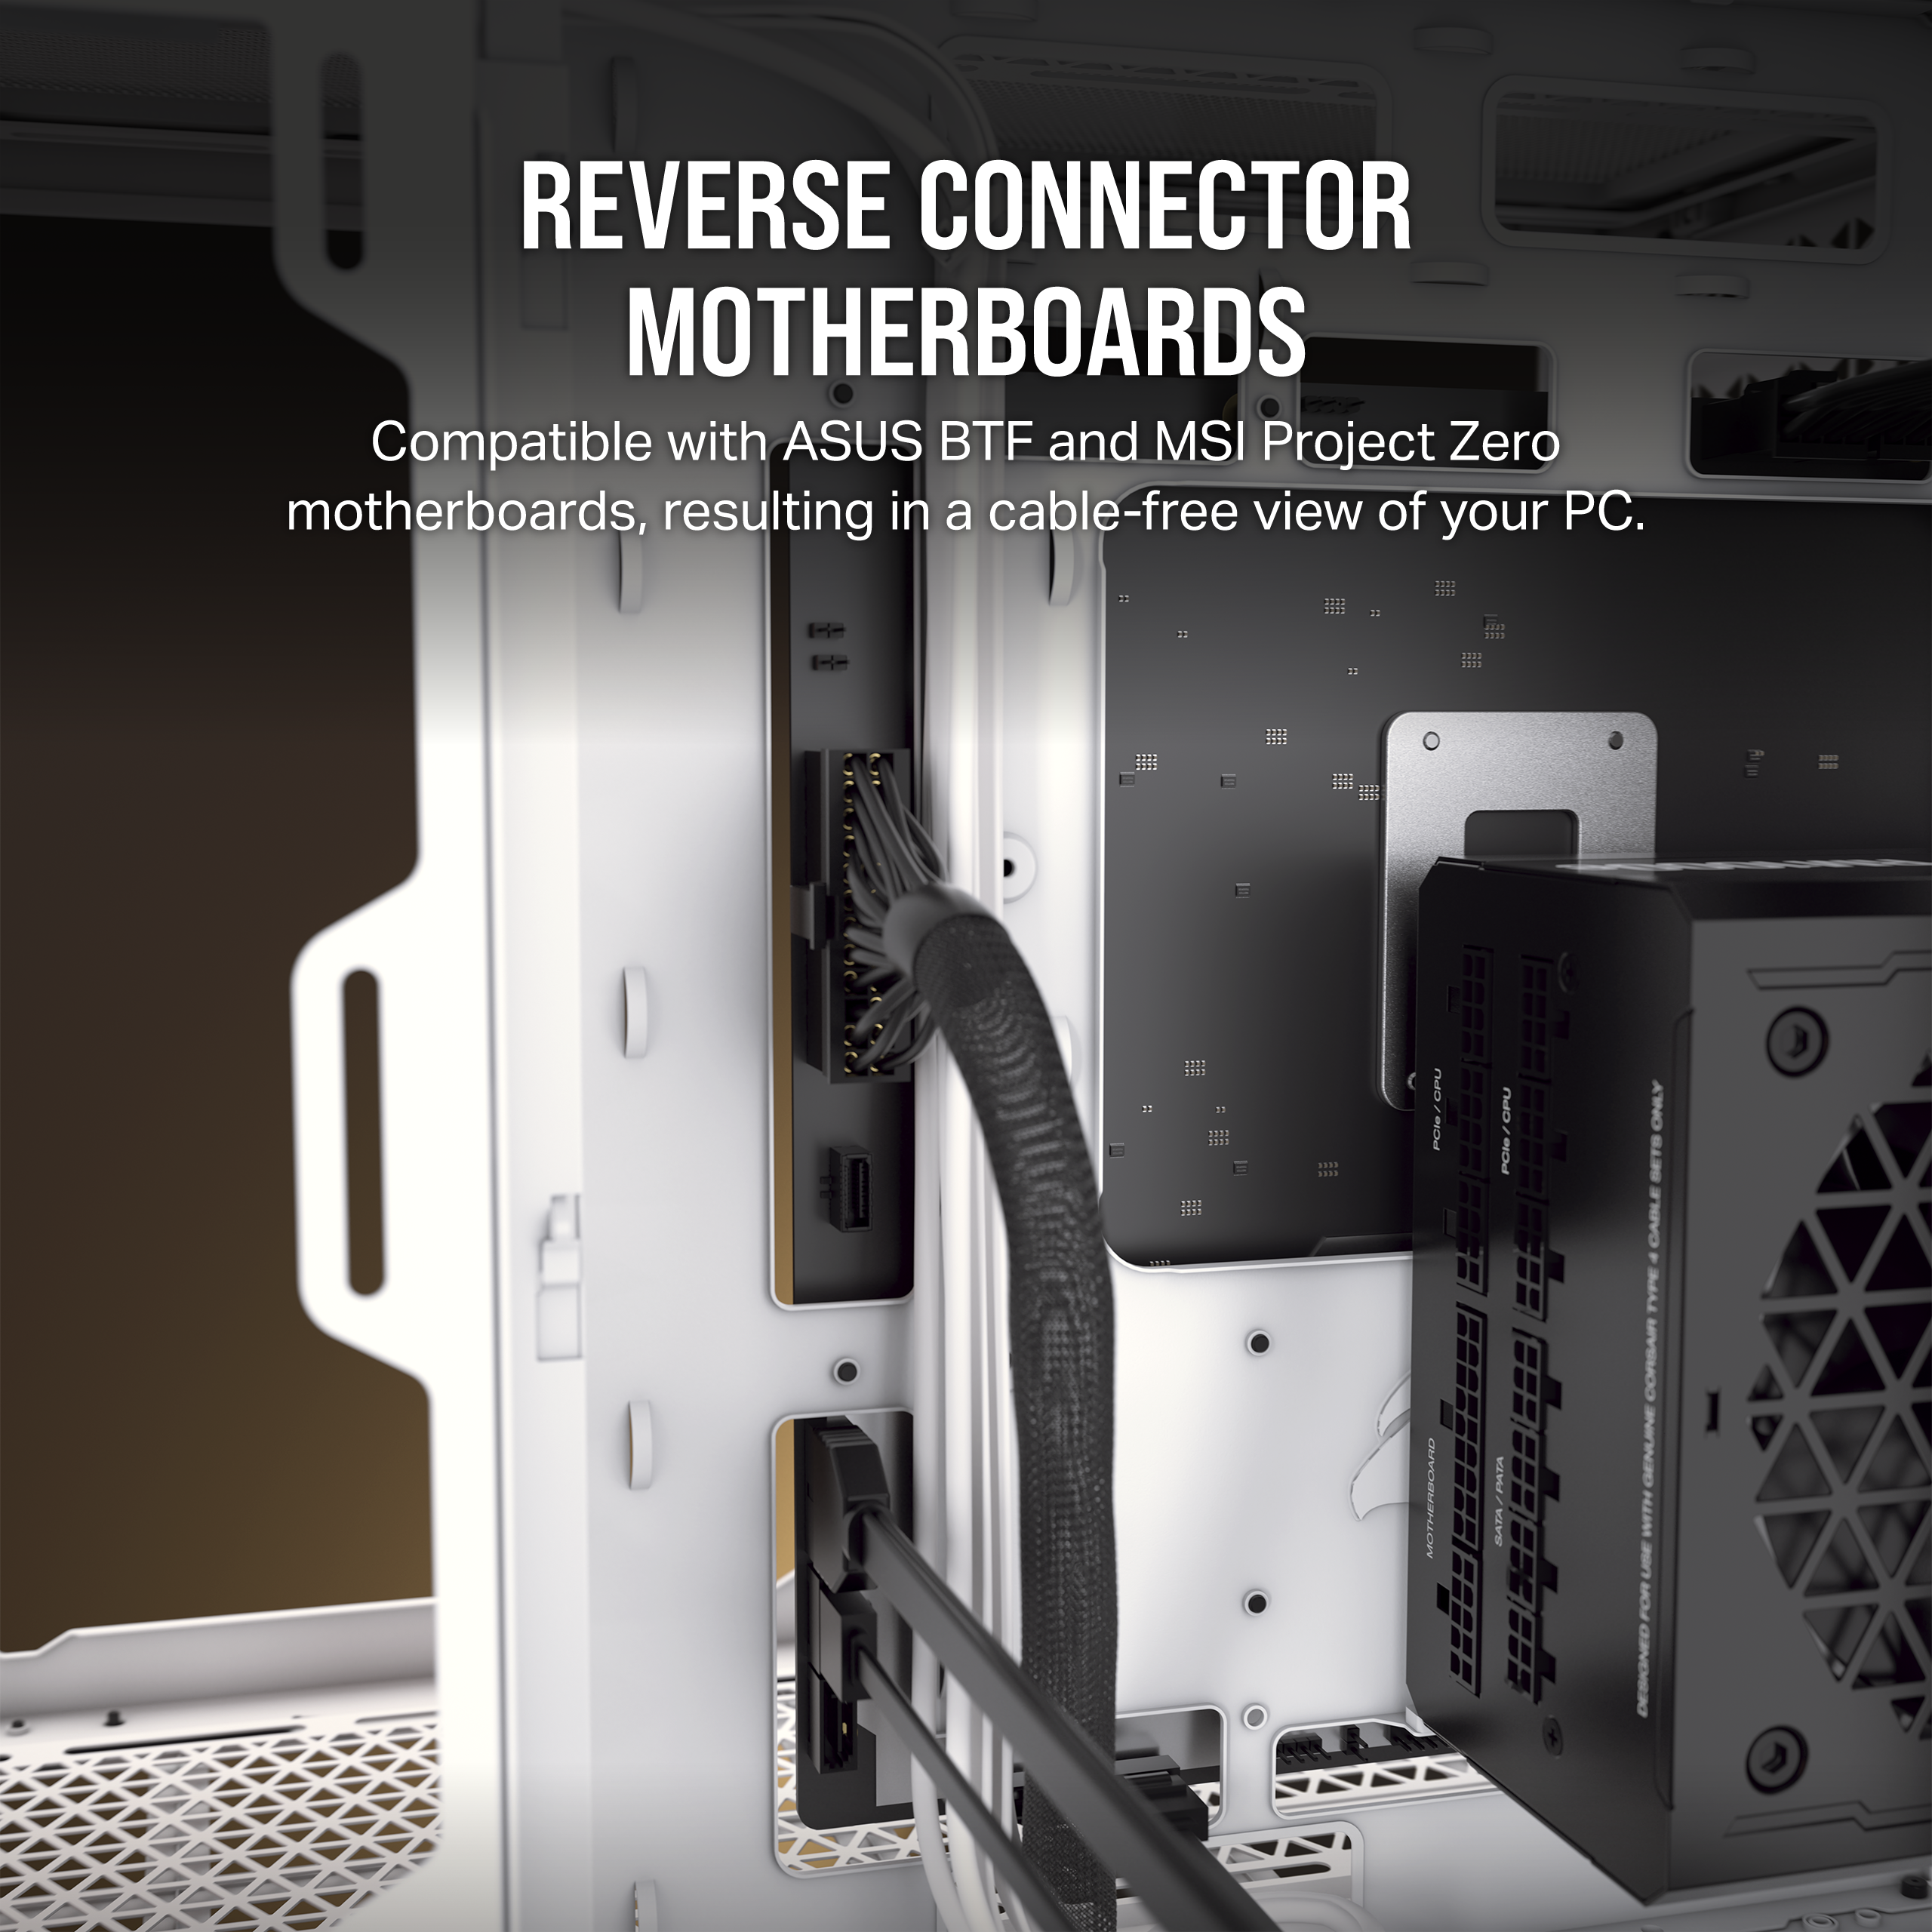 A large marketing image providing additional information about the product Corsair 6500D Airflow Tempered Glass Mid Tower Case - White - Additional alt info not provided